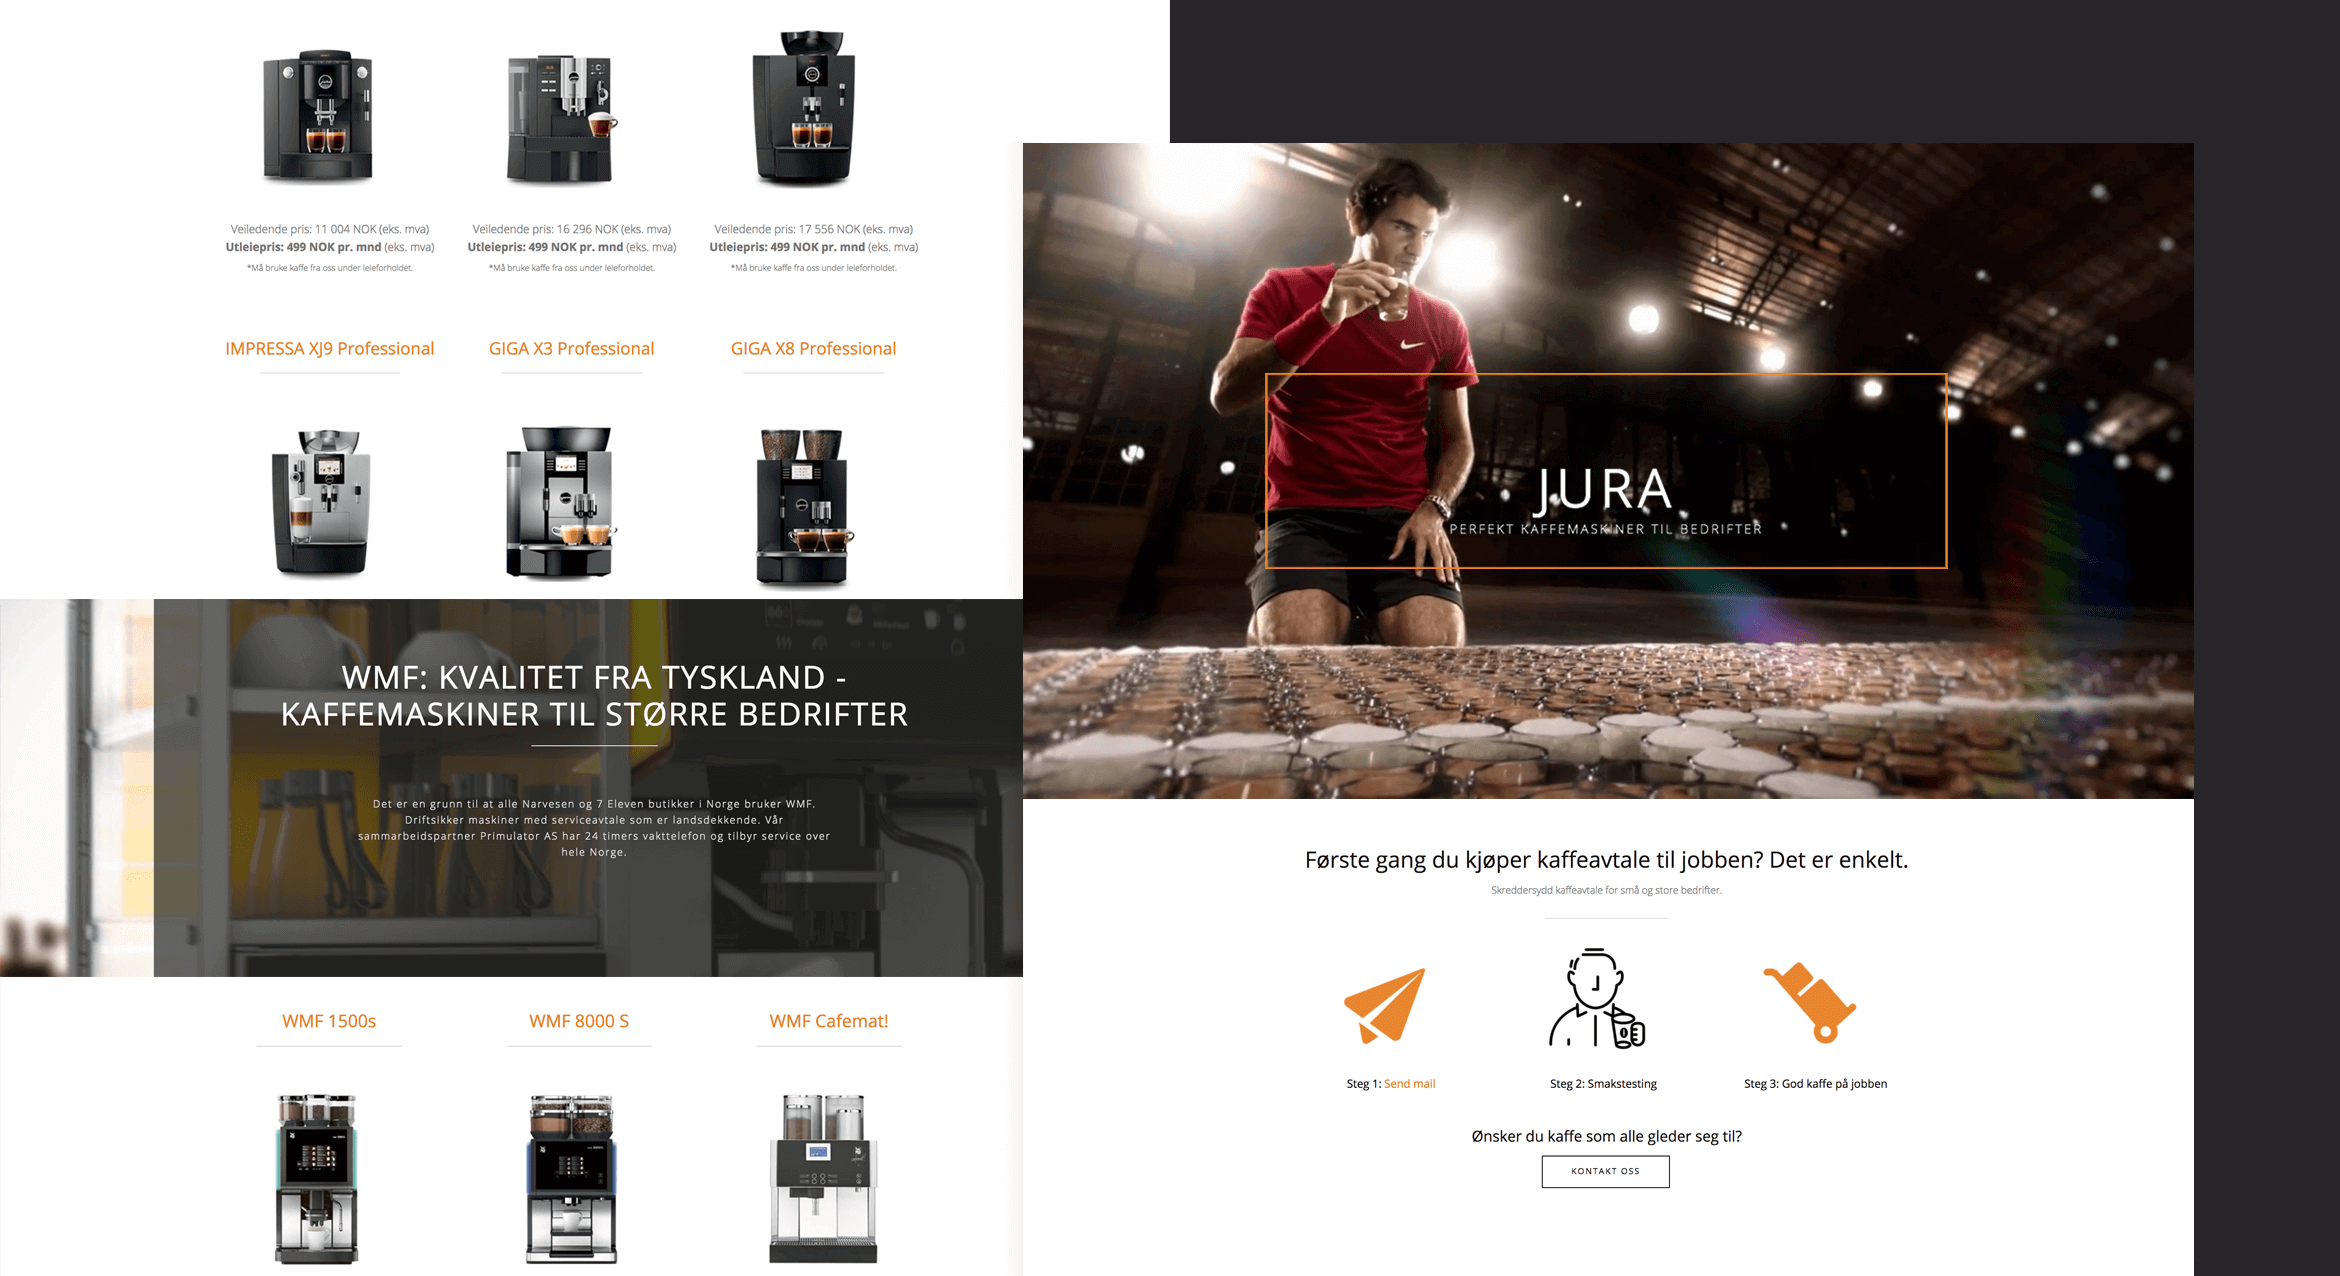 The Coffee Shop Website Design Service by Resolution Studio